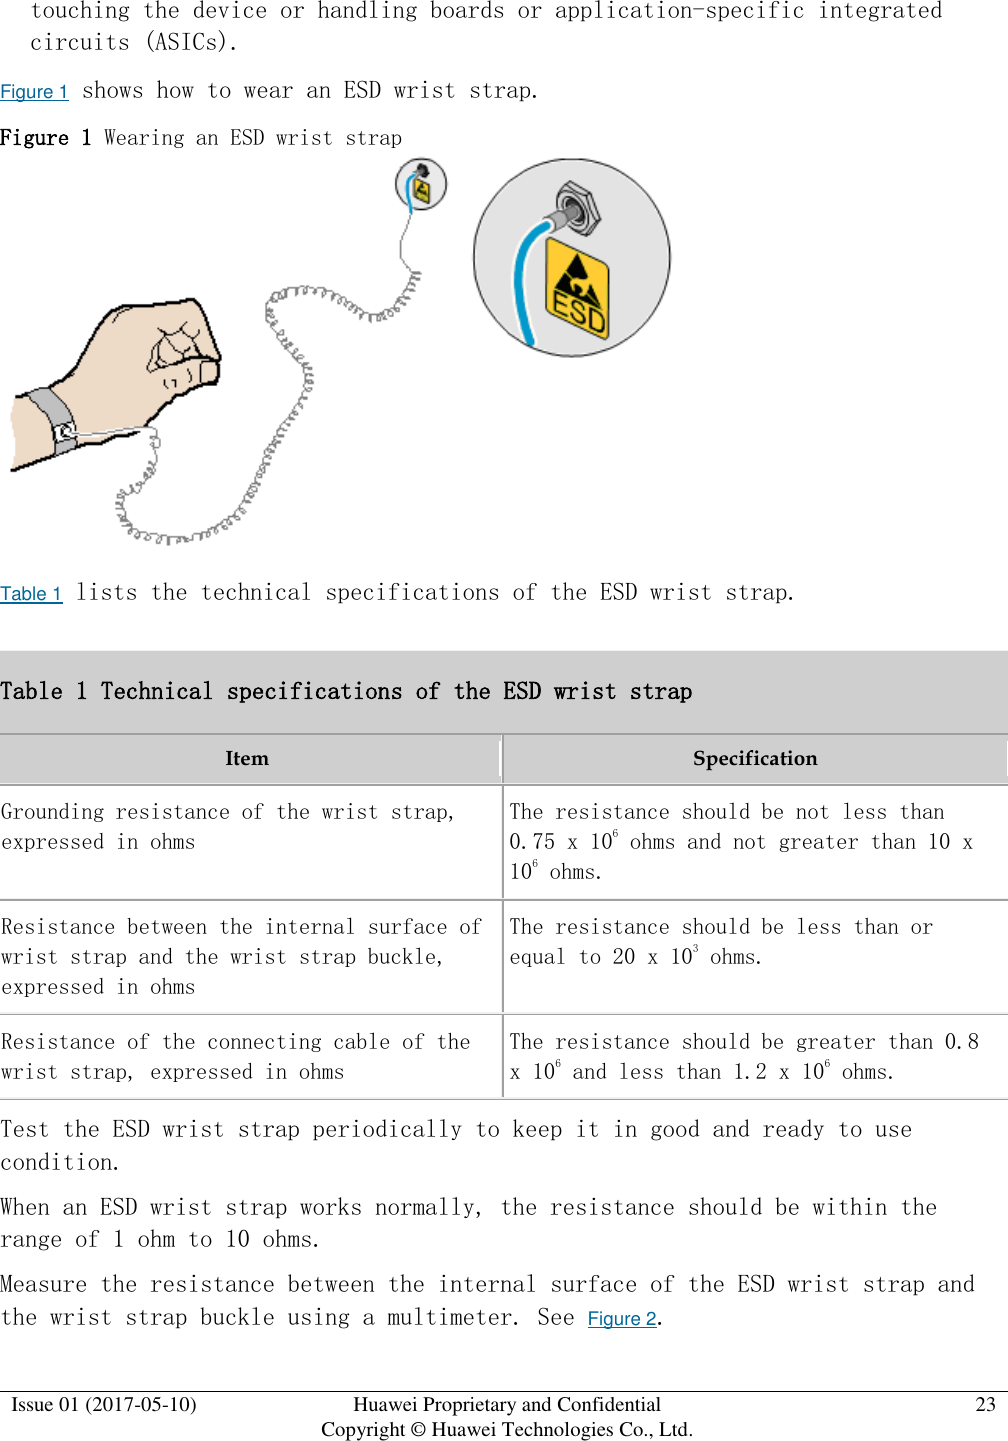  Issue 01 (2017-05-10) Huawei Proprietary and Confidential      Copyright © Huawei Technologies Co., Ltd. 23  touching the device or handling boards or application-specific integrated circuits (ASICs). Figure 1 shows how to wear an ESD wrist strap. Figure 1 Wearing an ESD wrist strap   Table 1 lists the technical specifications of the ESD wrist strap. Table 1 Technical specifications of the ESD wrist strap Item Specification Grounding resistance of the wrist strap, expressed in ohms The resistance should be not less than 0.75 x 106 ohms and not greater than 10 x 106 ohms. Resistance between the internal surface of wrist strap and the wrist strap buckle, expressed in ohms The resistance should be less than or equal to 20 x 103 ohms. Resistance of the connecting cable of the wrist strap, expressed in ohms The resistance should be greater than 0.8 x 106 and less than 1.2 x 106 ohms. Test the ESD wrist strap periodically to keep it in good and ready to use condition. When an ESD wrist strap works normally, the resistance should be within the range of 1 ohm to 10 ohms. Measure the resistance between the internal surface of the ESD wrist strap and the wrist strap buckle using a multimeter. See Figure 2. 